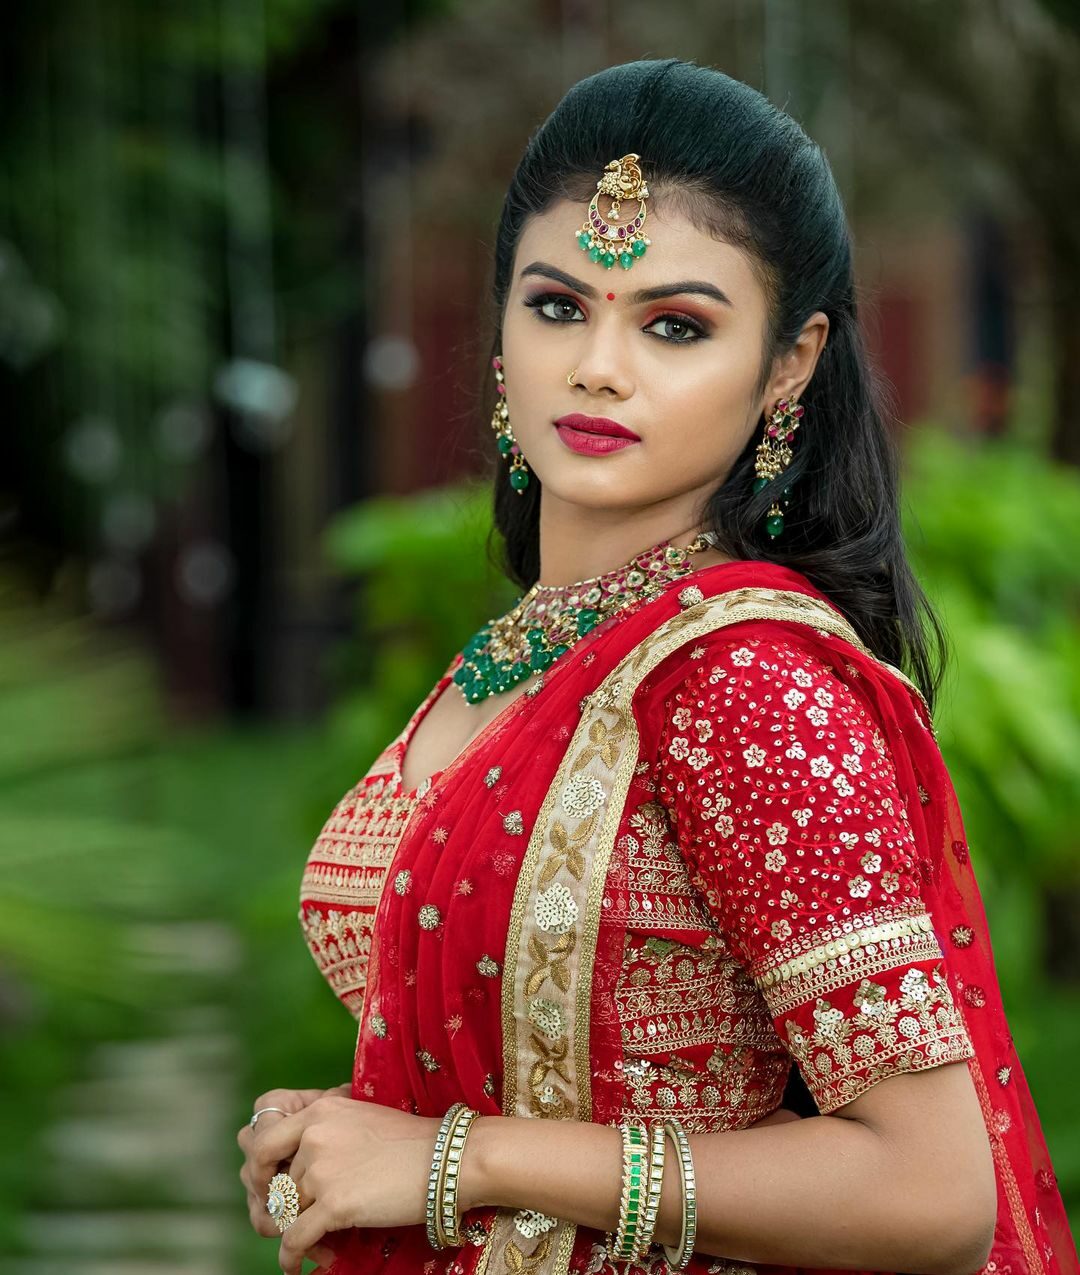 Akshitha Ashok (Actor) - Age, Height, Family, Date Of Birth, Brother